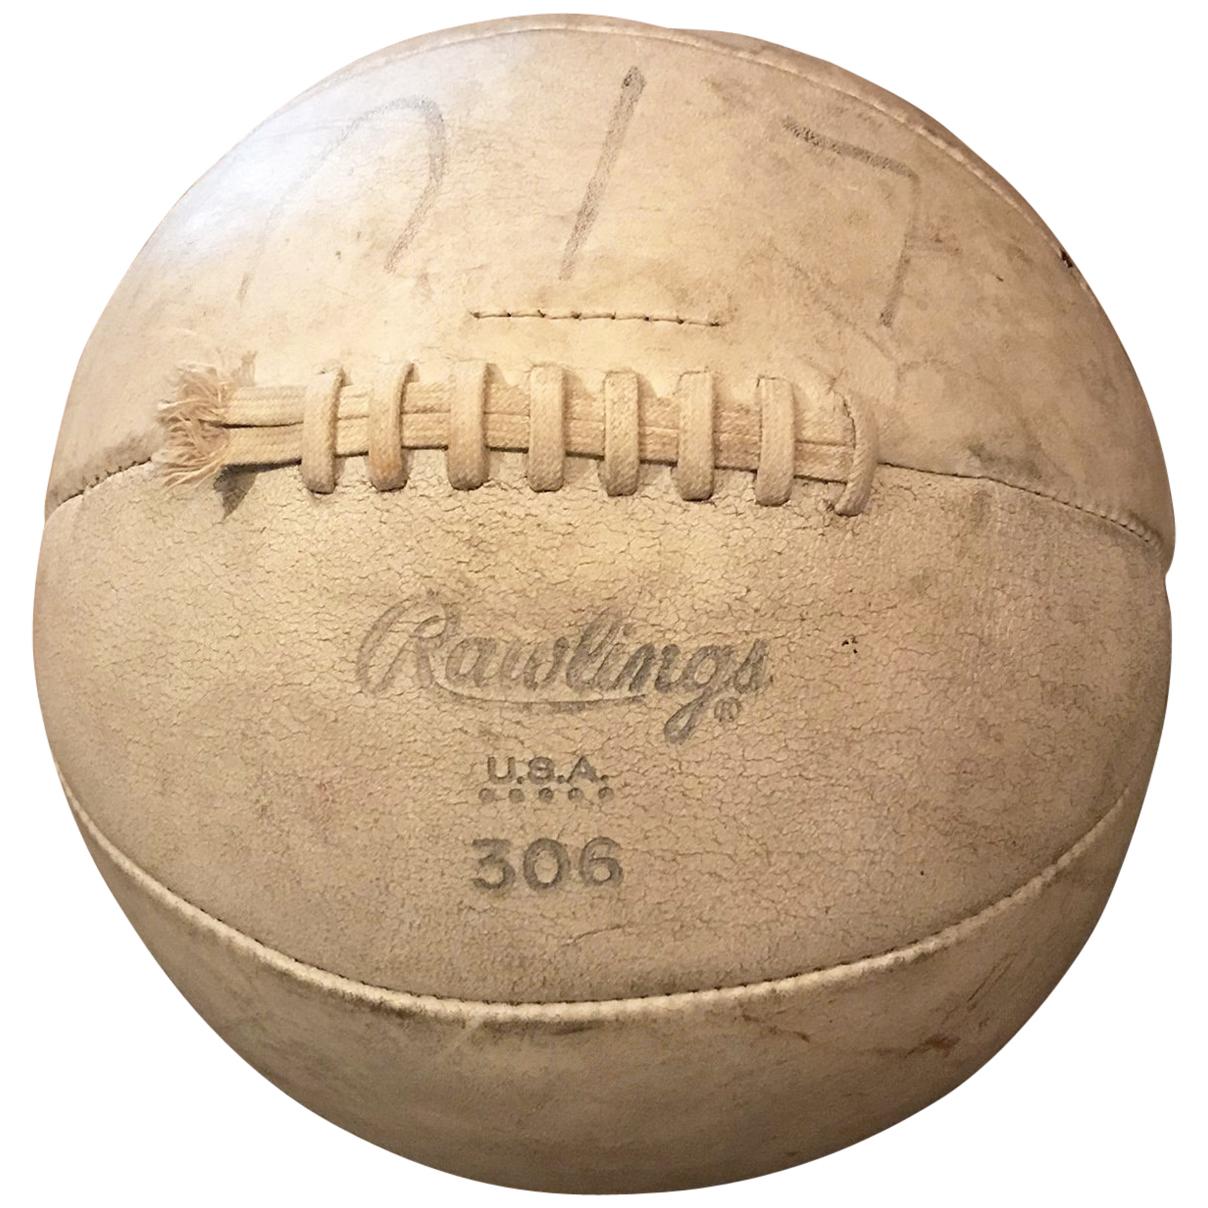 Vintage Rawlings White Leather Medicine Ball